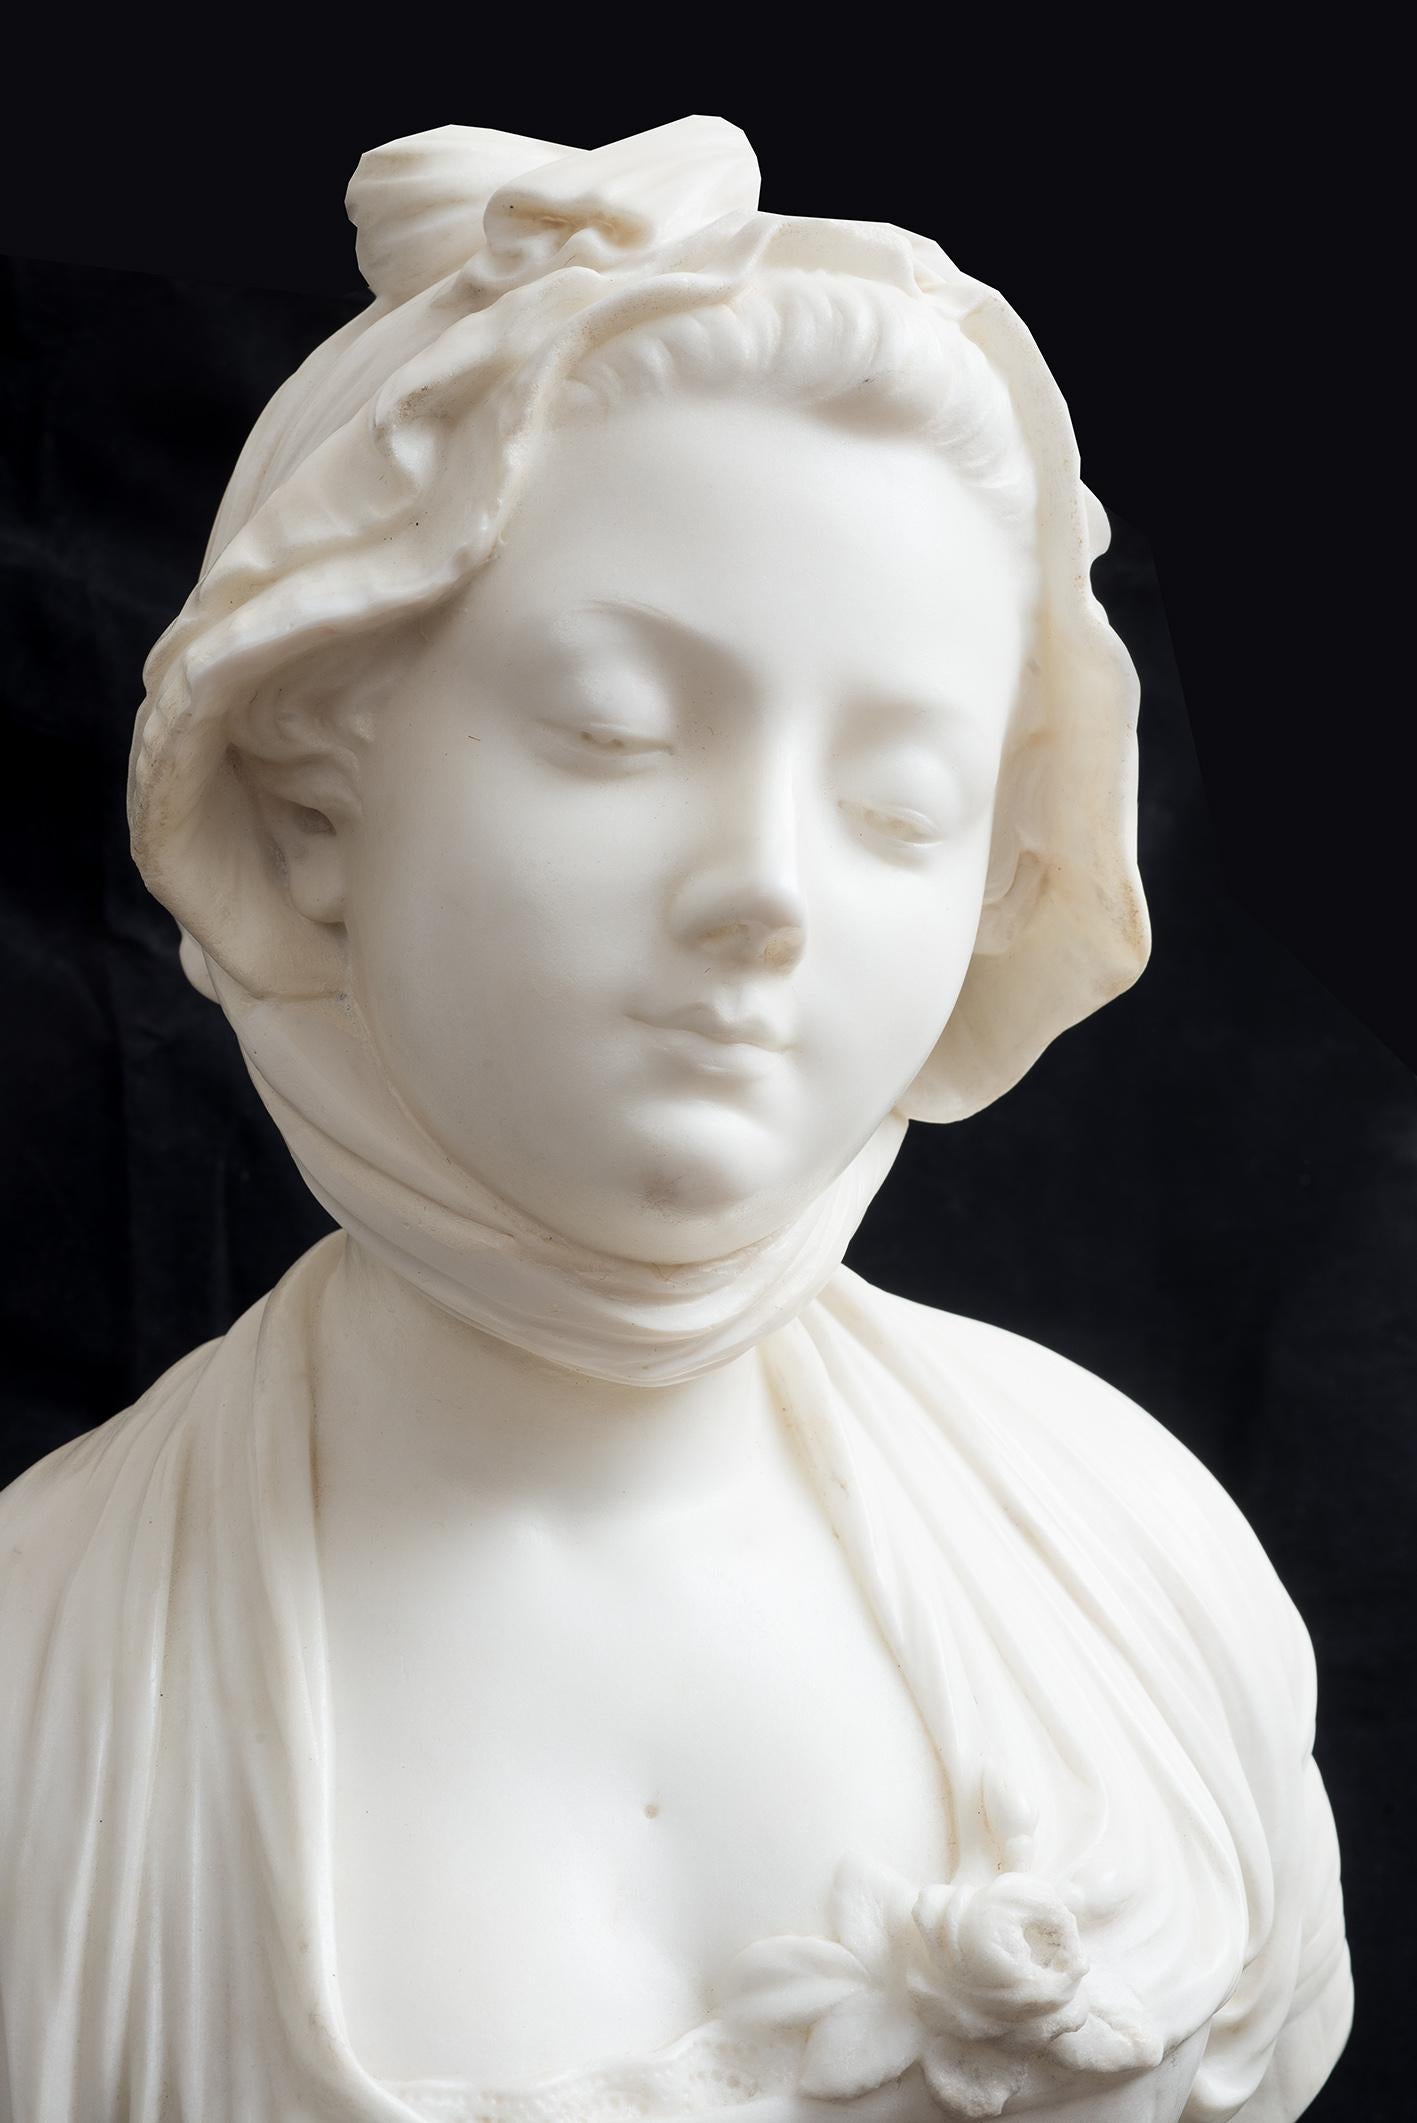 Antique white marble statuary sculpture depicting bust of noblewoman. - Sculpture by Unknown